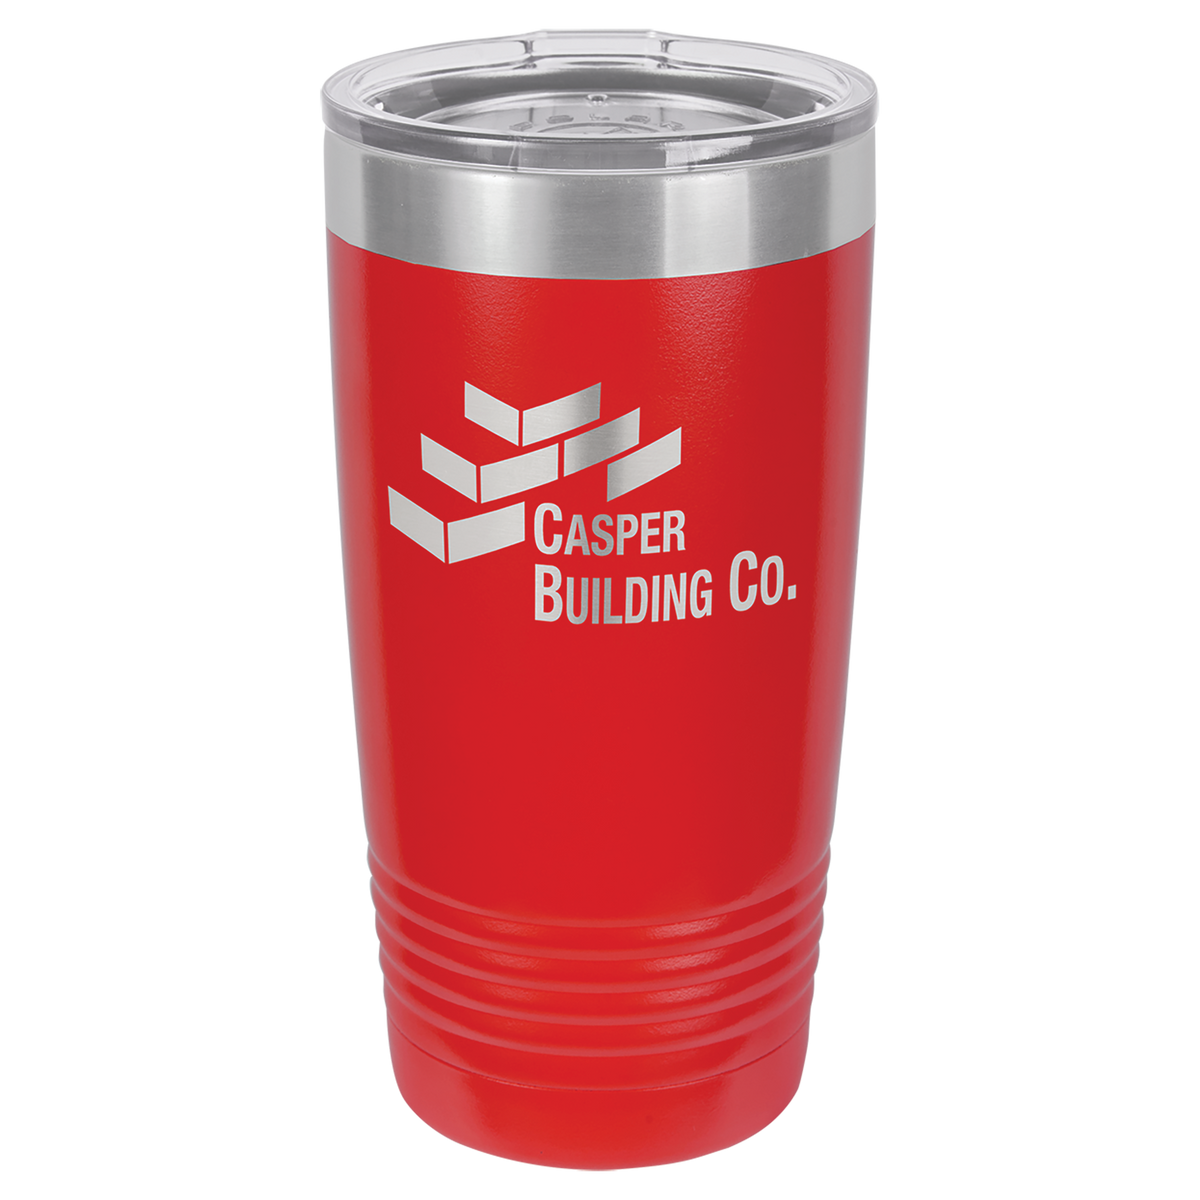 Bundle Deal for First-Time Customers - 8 Personalized 20 oz. Tumblers - Polar Camel